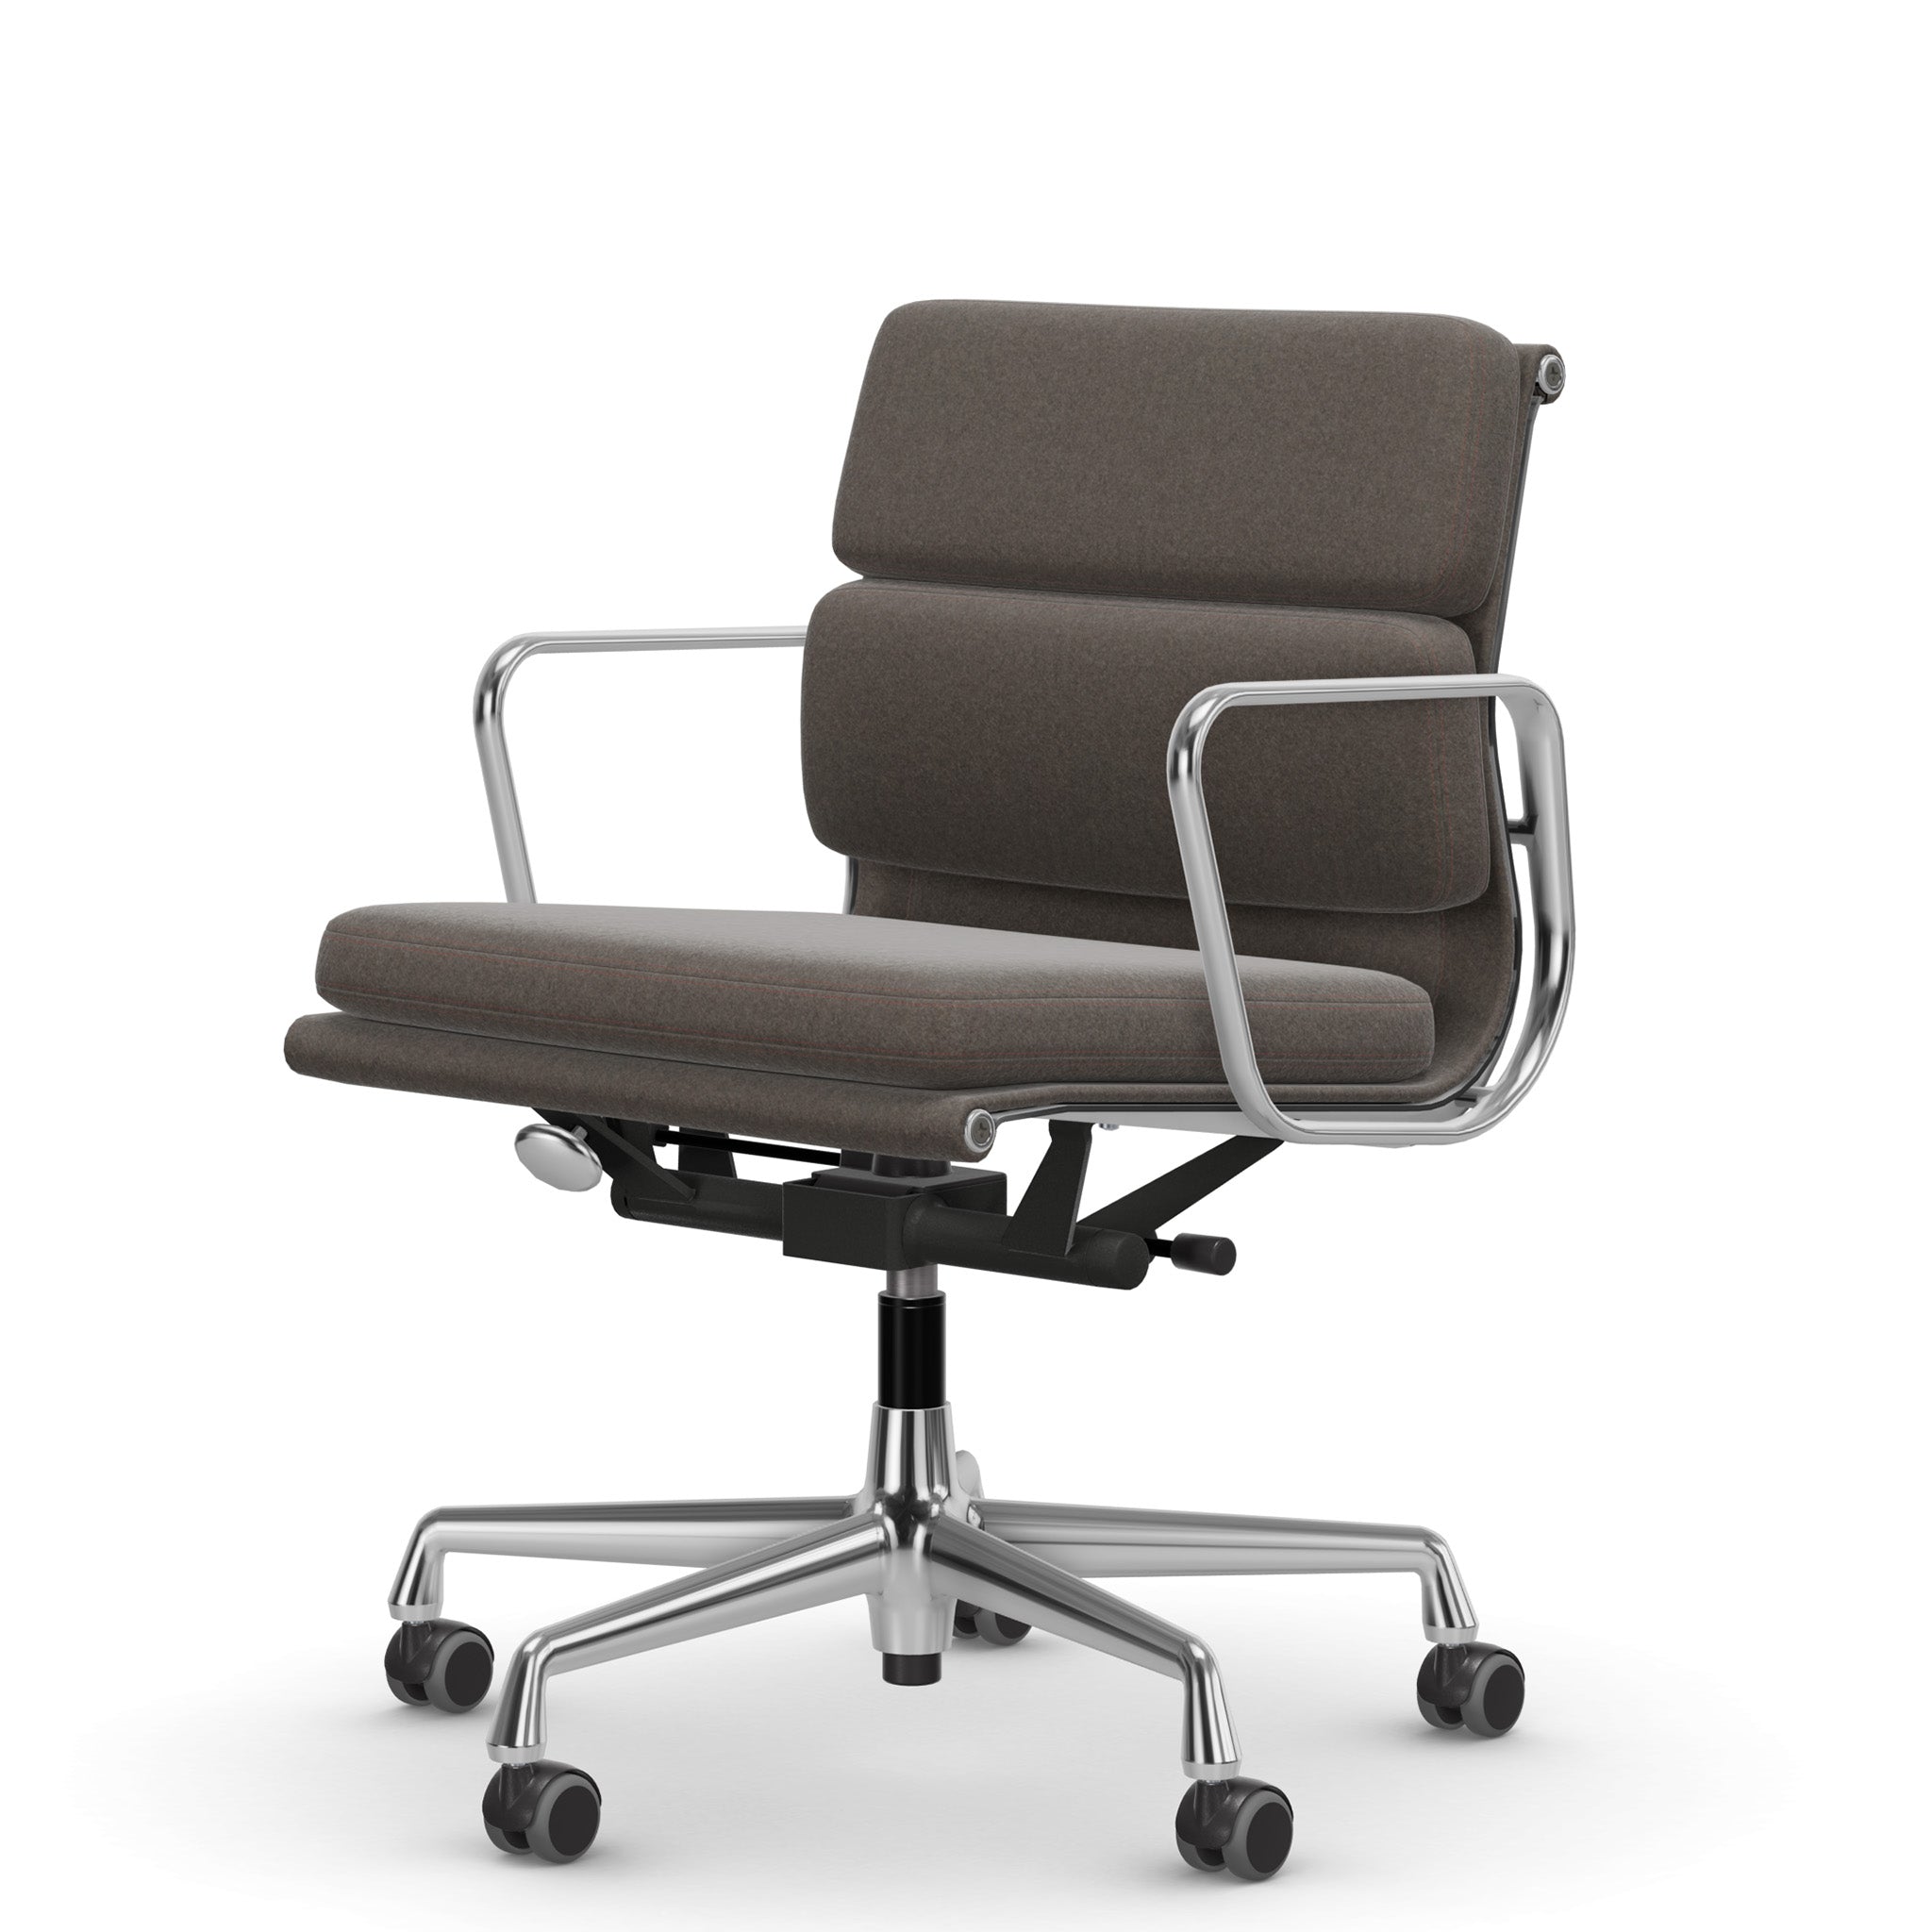 EA 217 Soft Pad Task Chair by Vitra